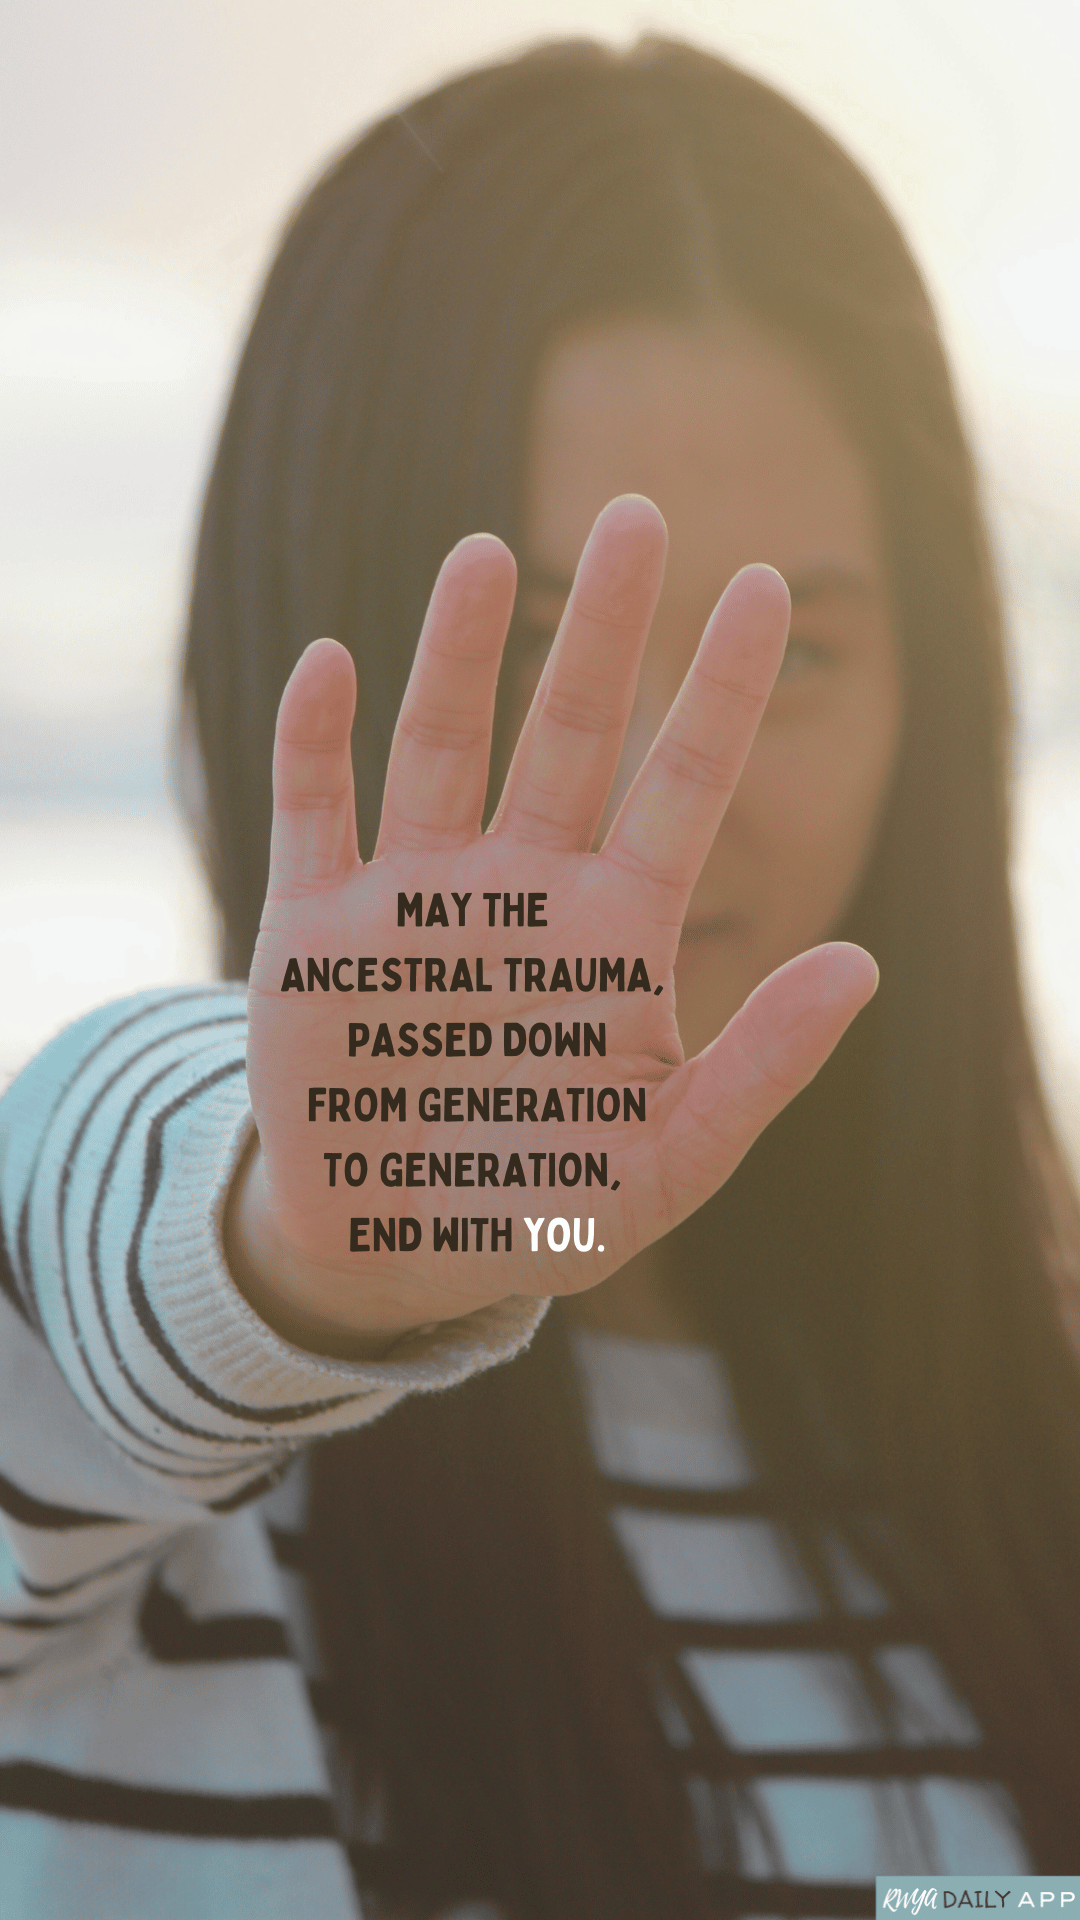 May the ancestral trauma, passed down from generation to generation, end with YOU.